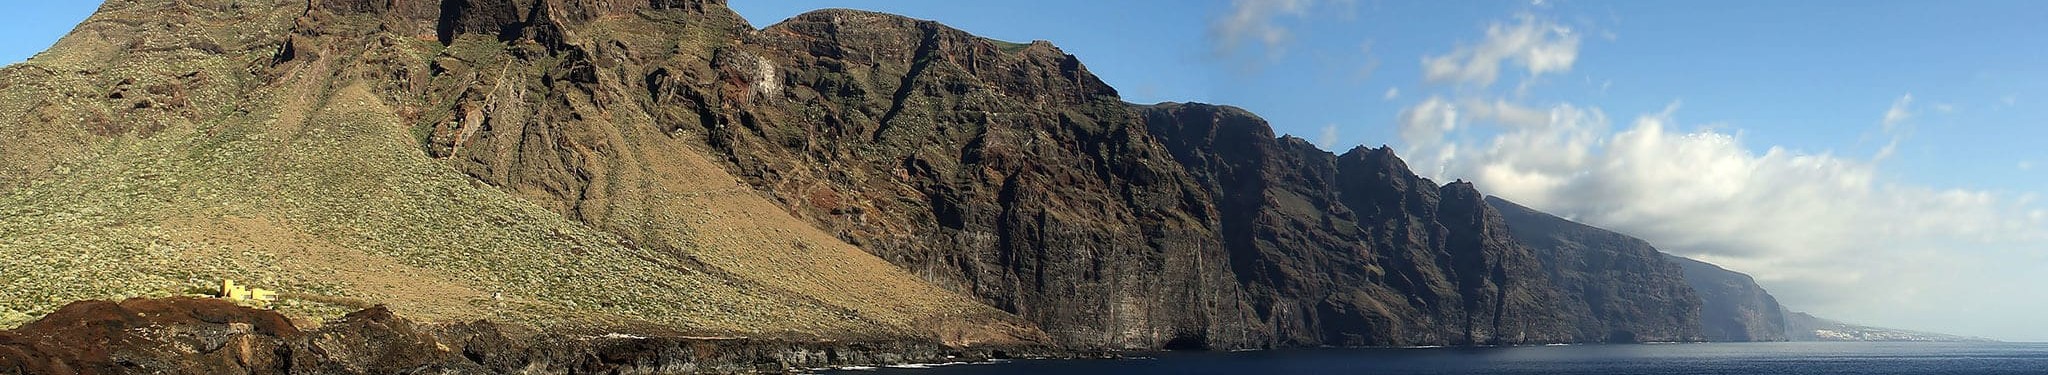 Acantilados de los Gigantes, which translates to ‘Cliffs of the Giants’